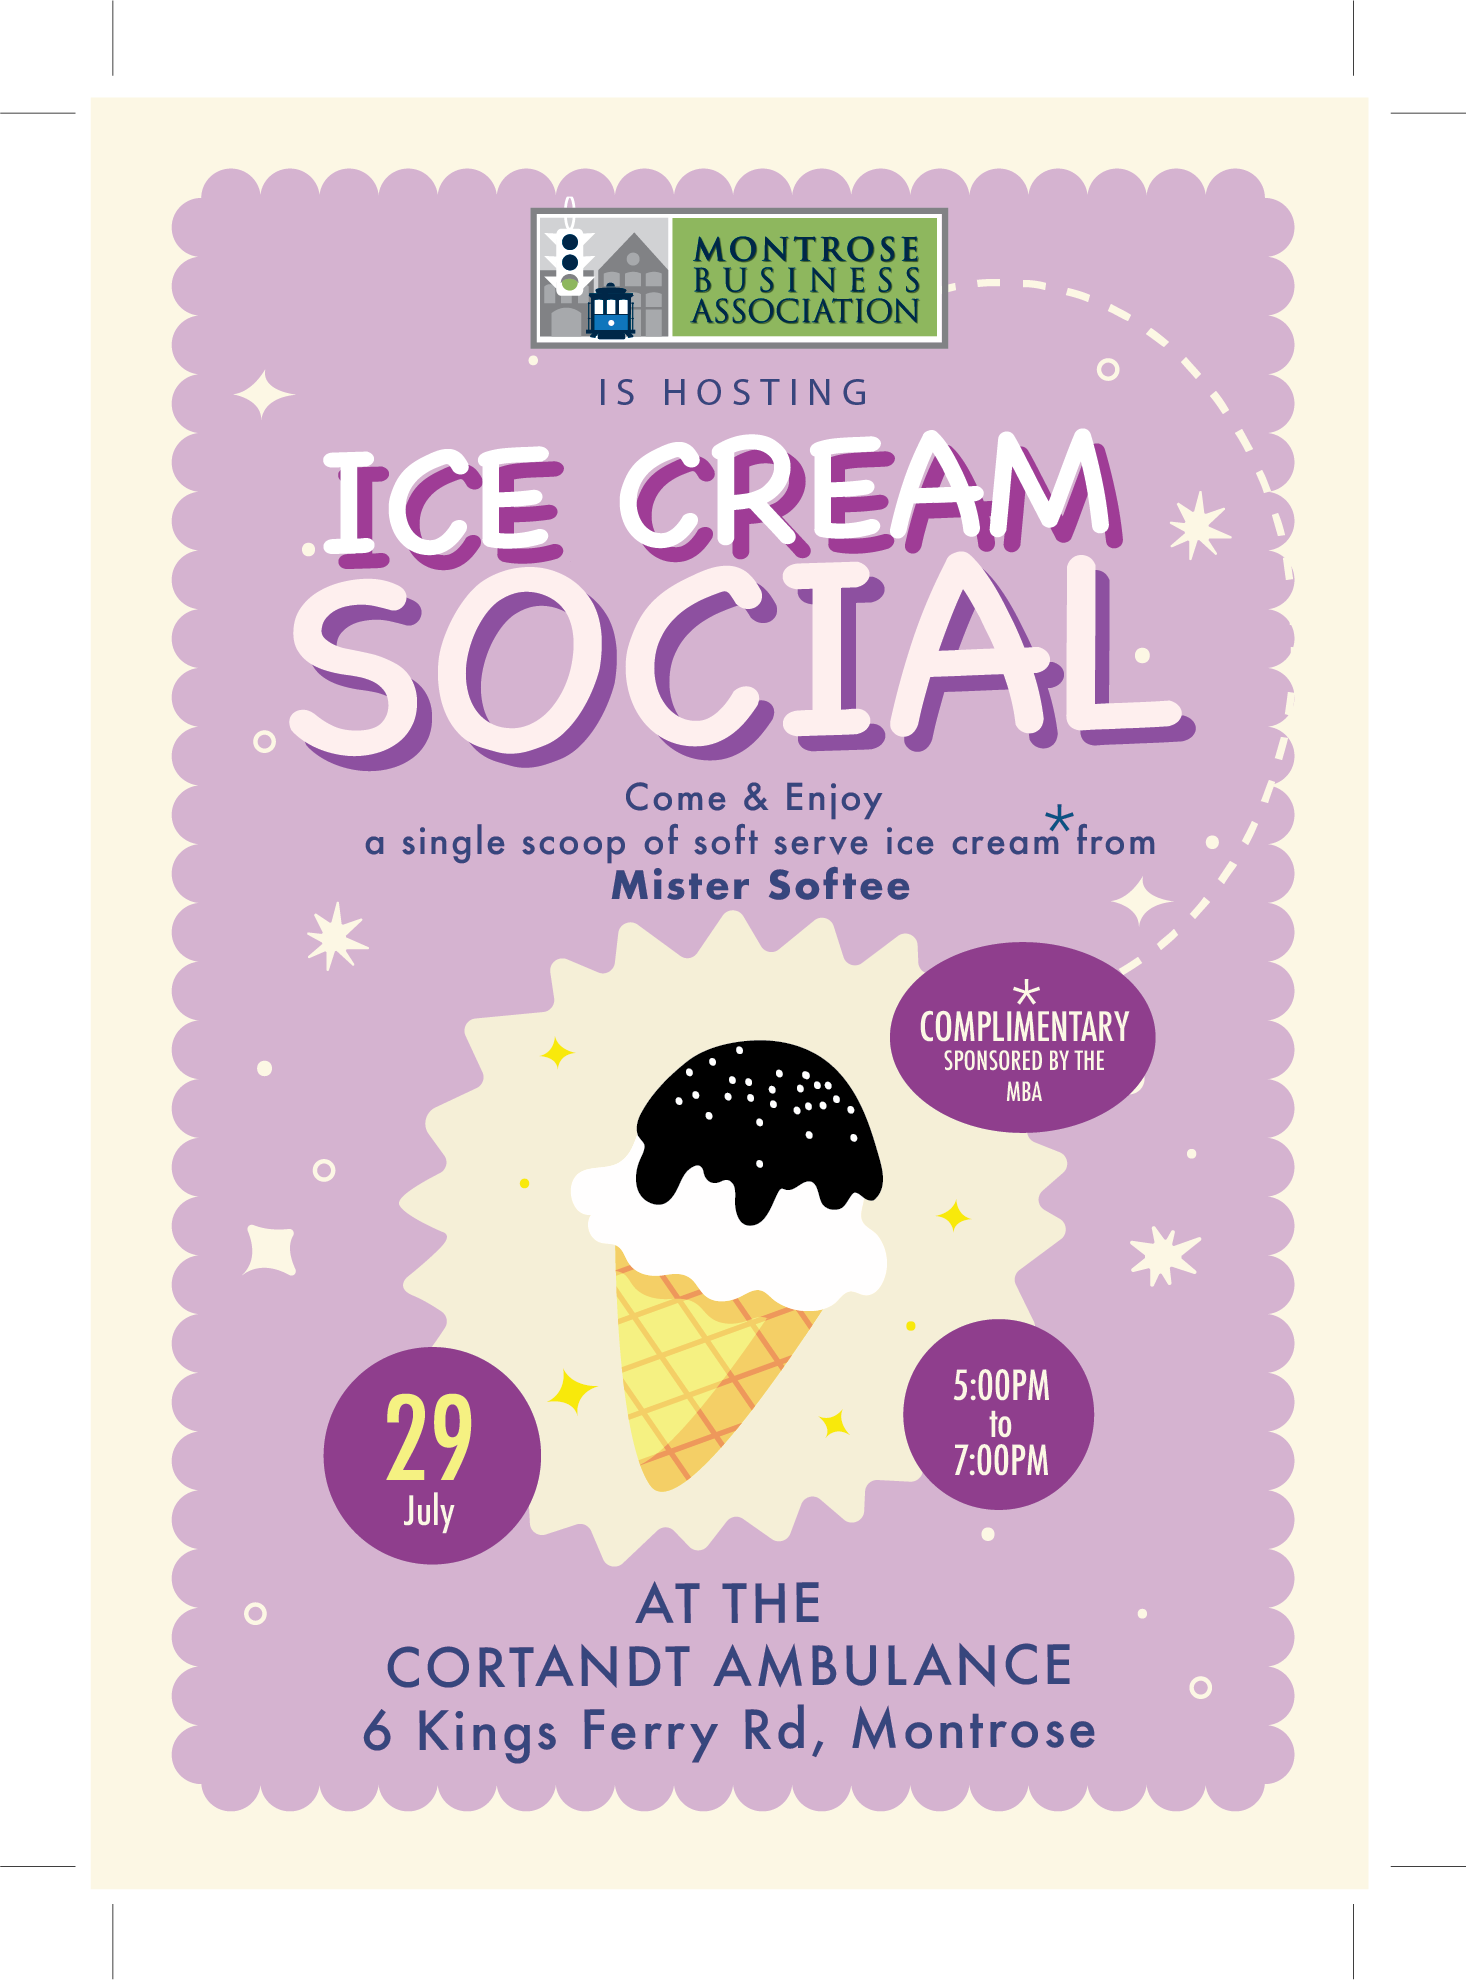 Ice Cream Social Flyer_07_29.png